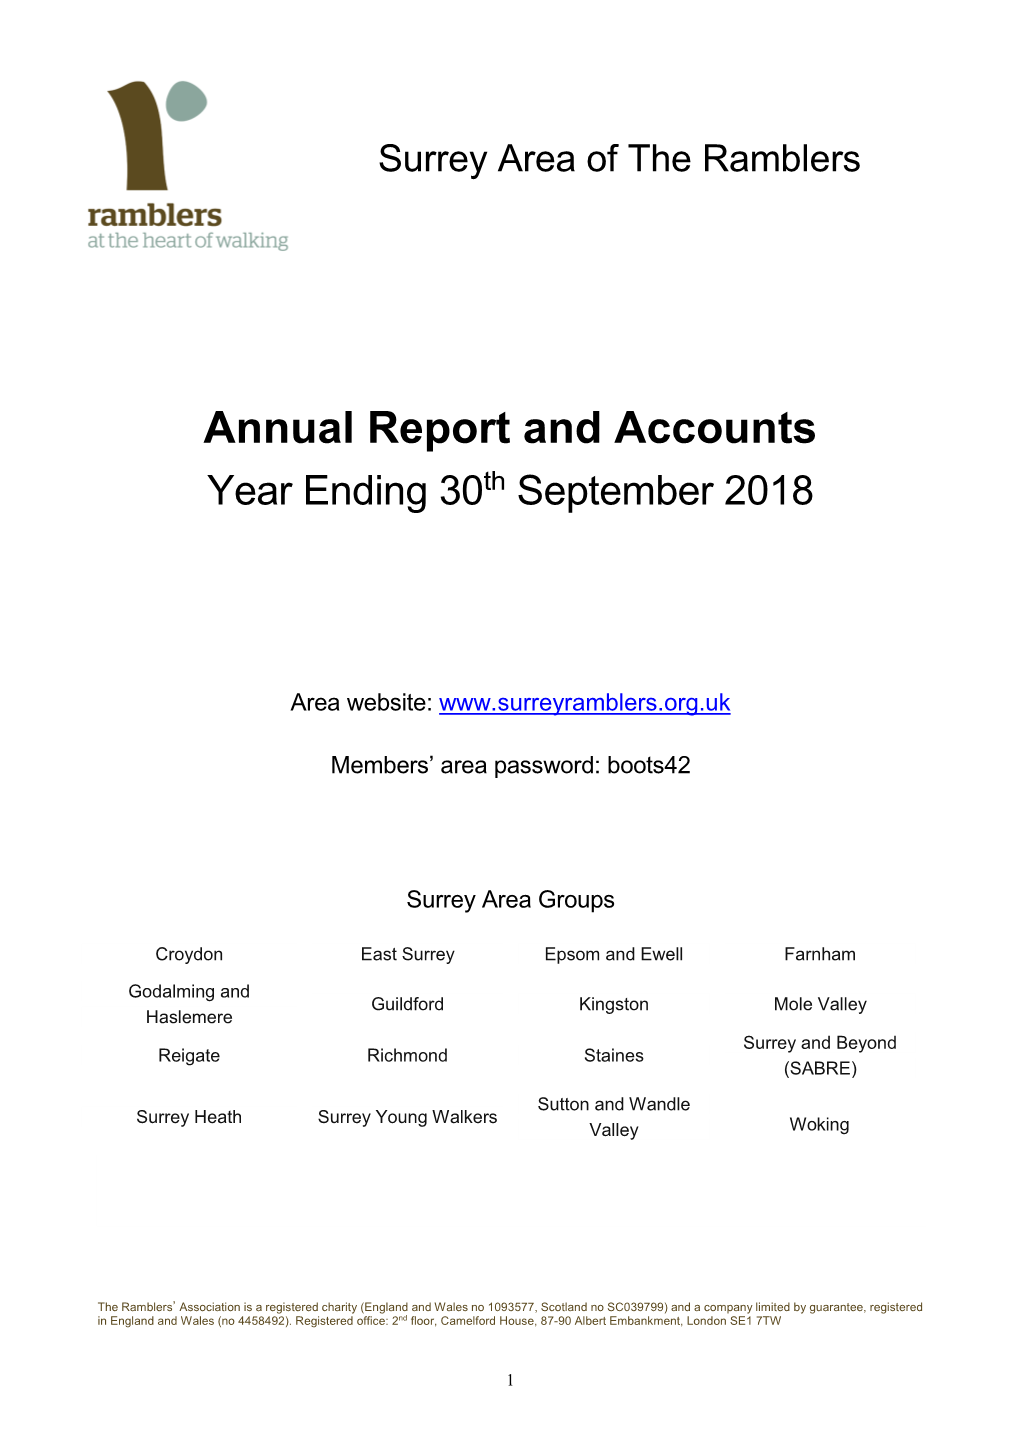 Annual Report and Accounts Year Ending 30Th September 2018